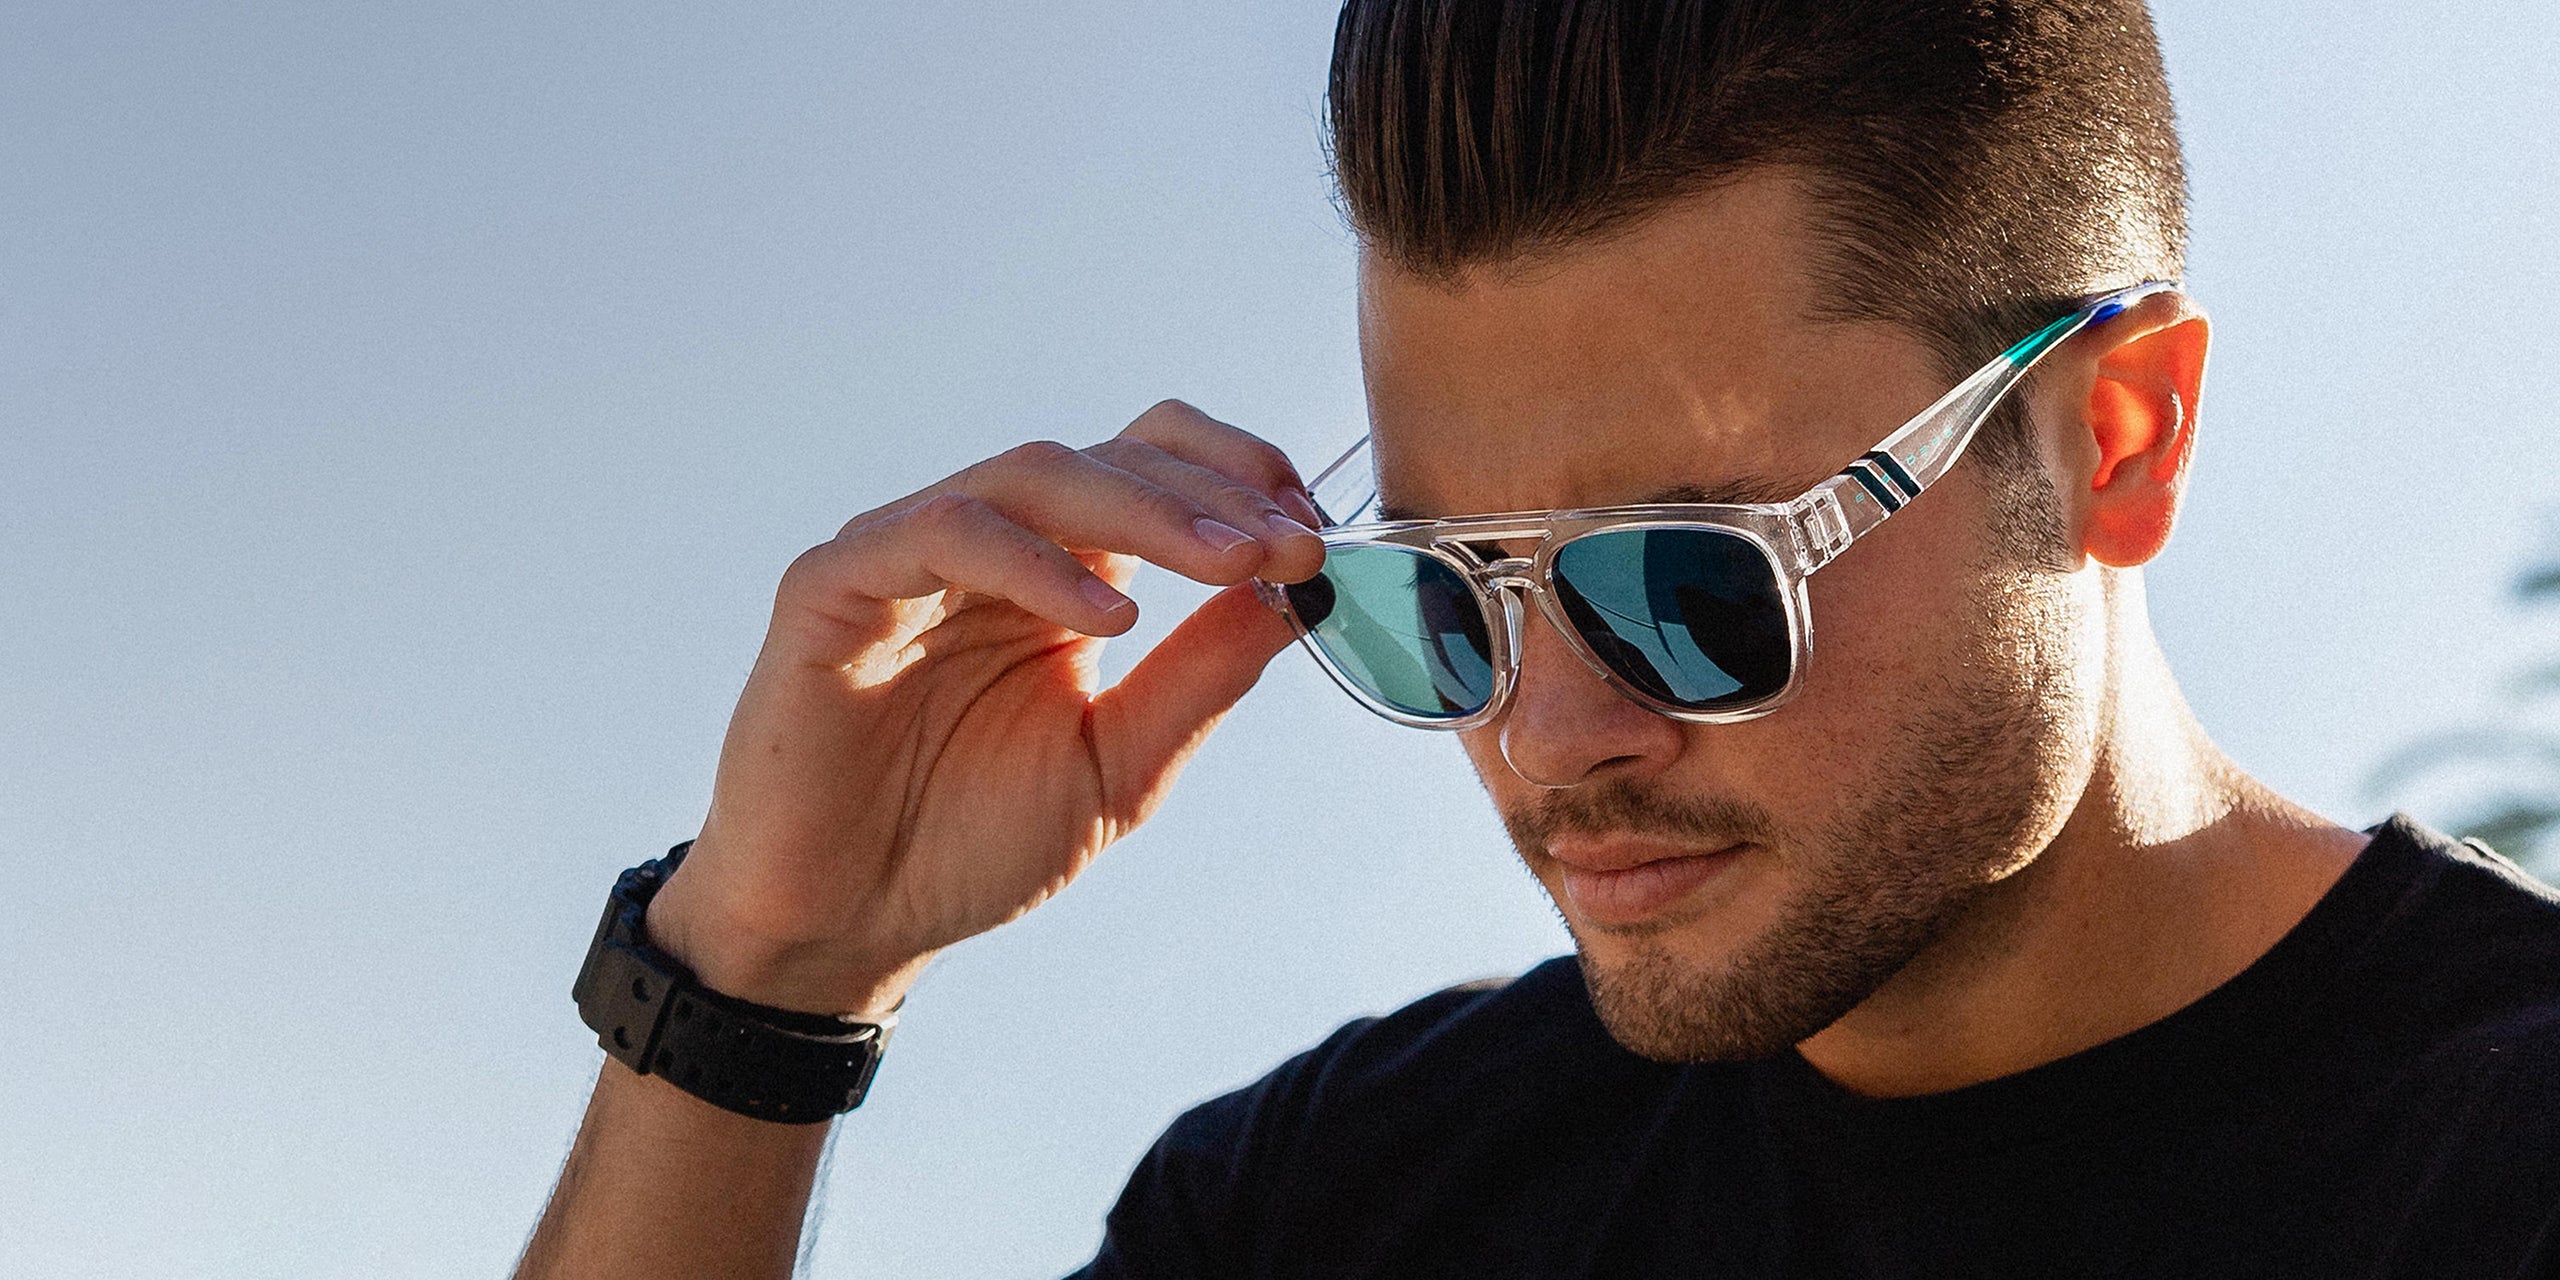 Finding The Right Sunglasses - Best Sunglasses For Your Face Shape